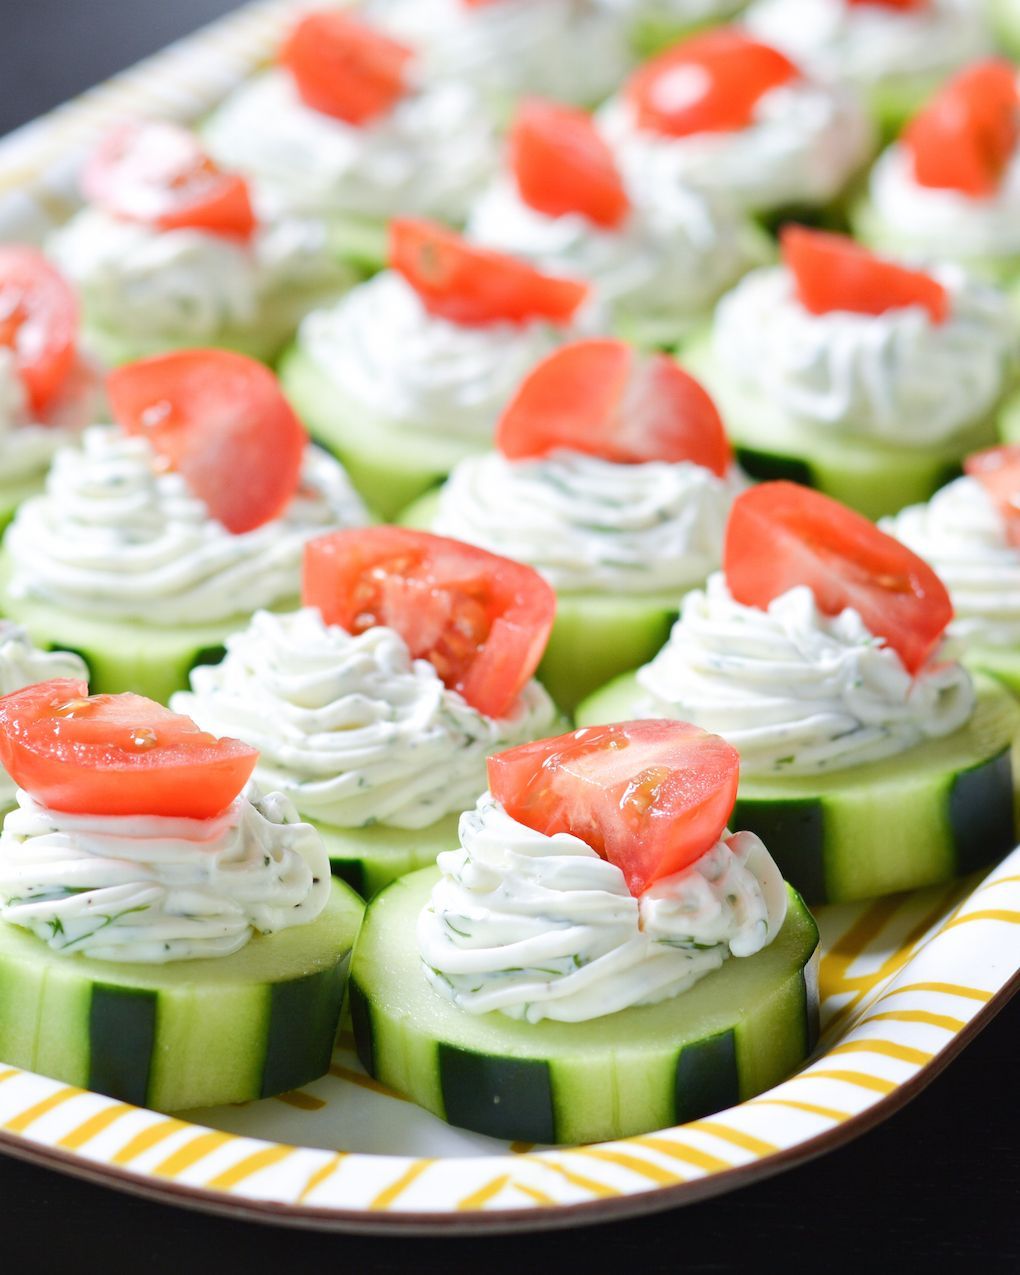 These fresh Dilly Cucumber Bites make a great healthy appetizer. Cucumber slices a